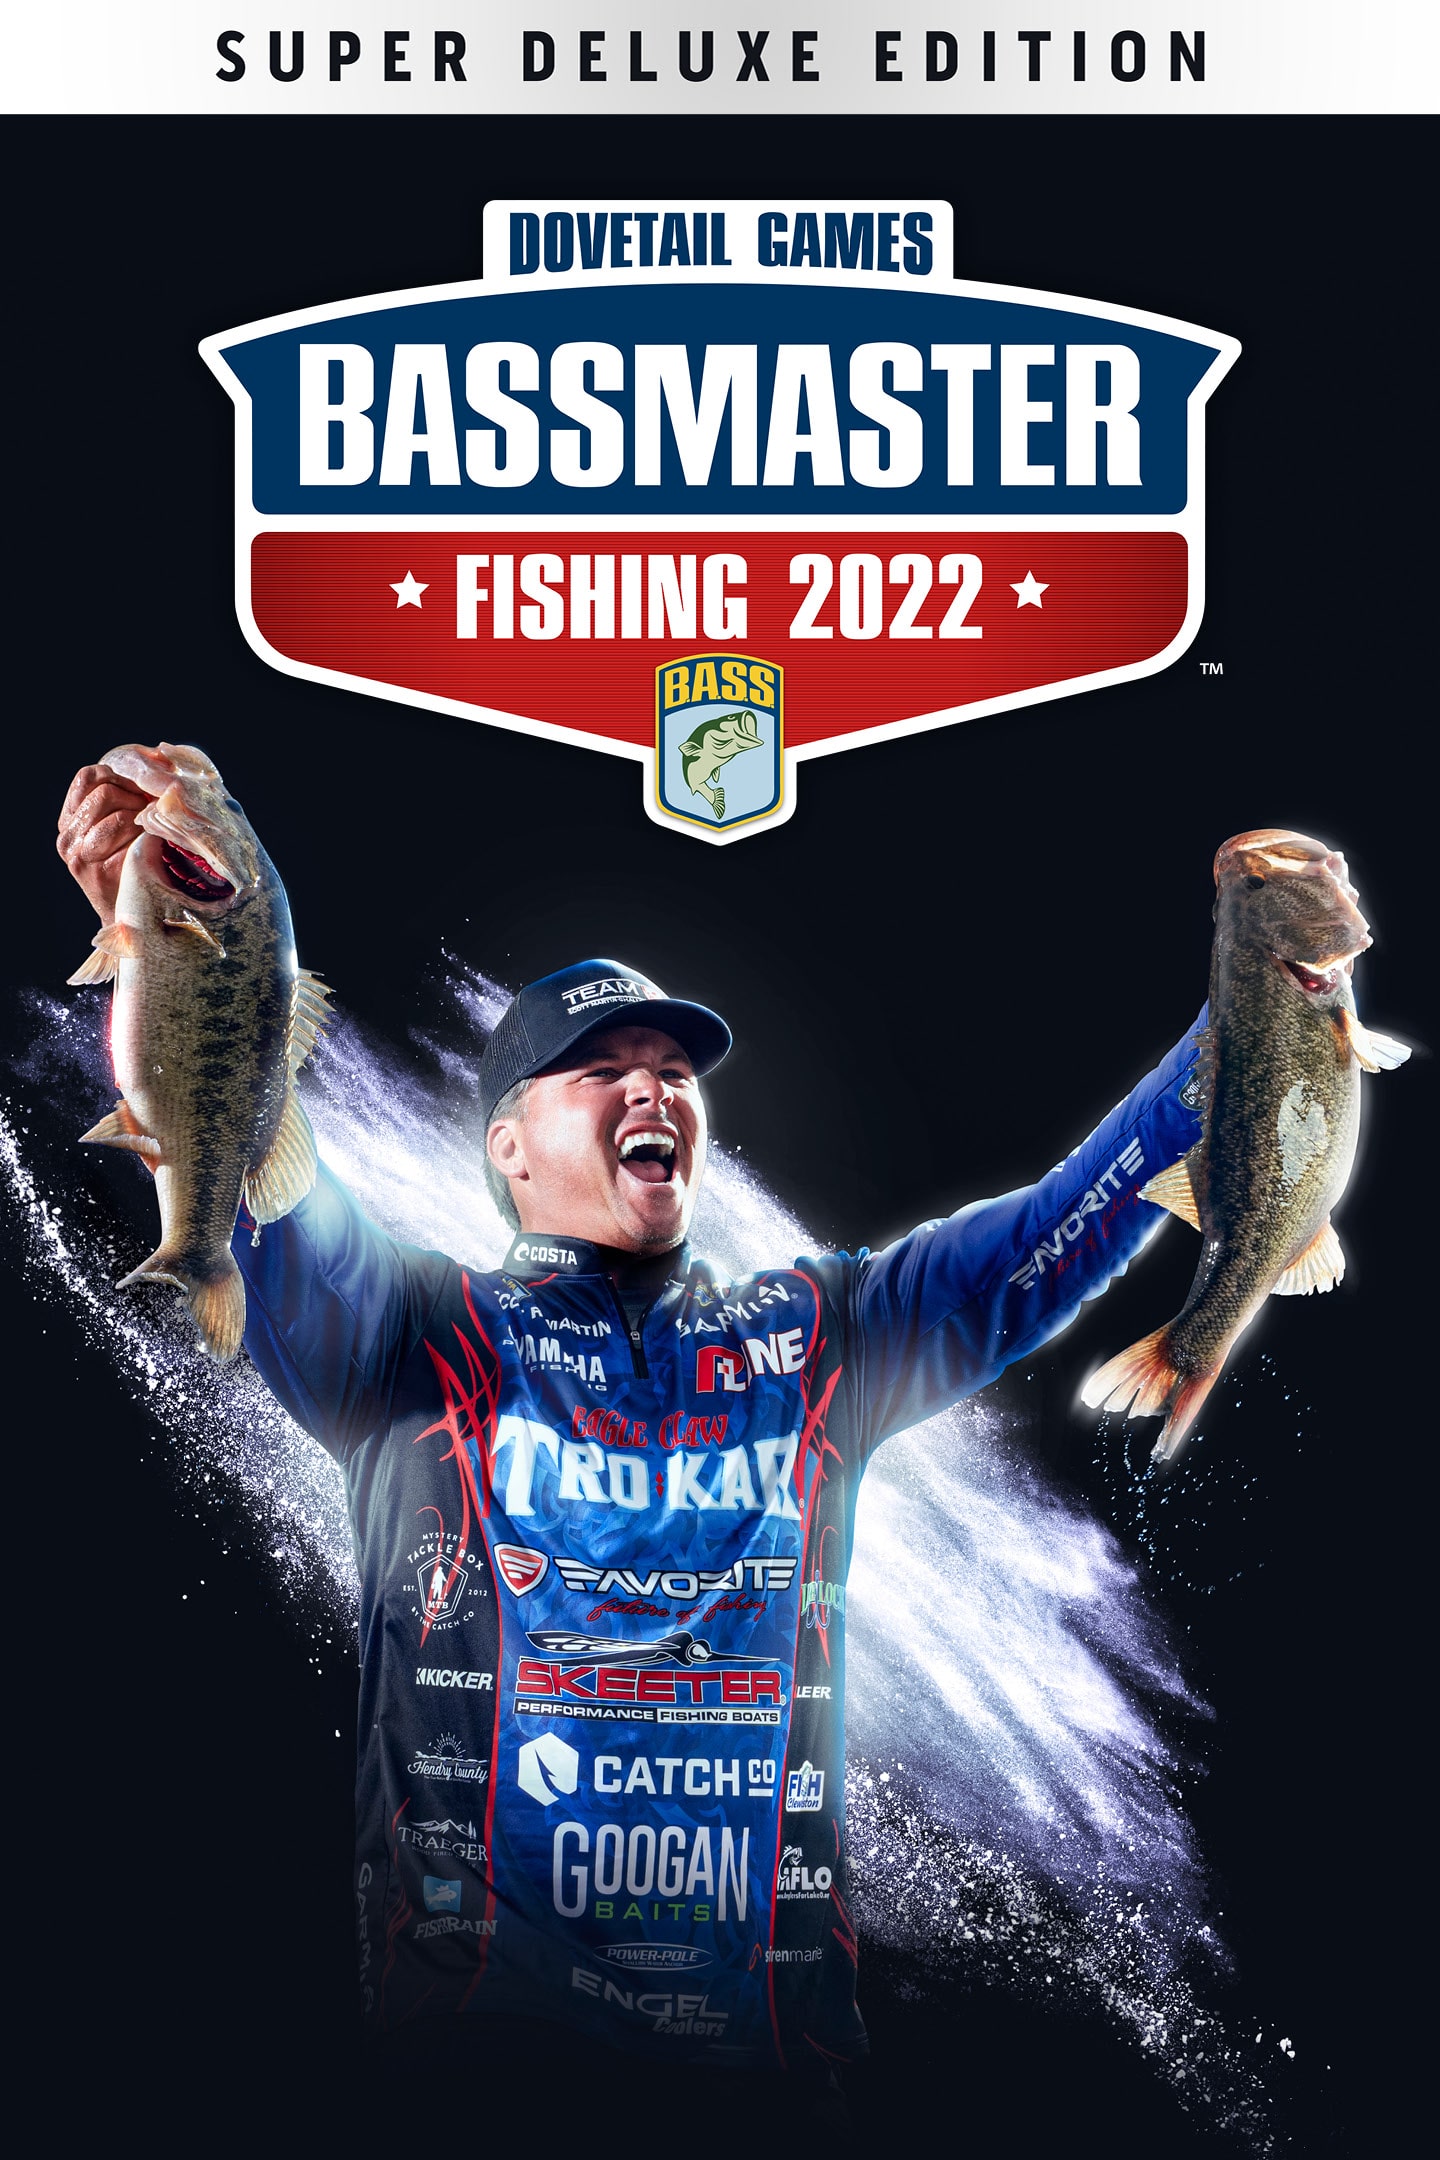 Bassmaster® Fishing: Deluxe Edition PS4™ PS5™ and